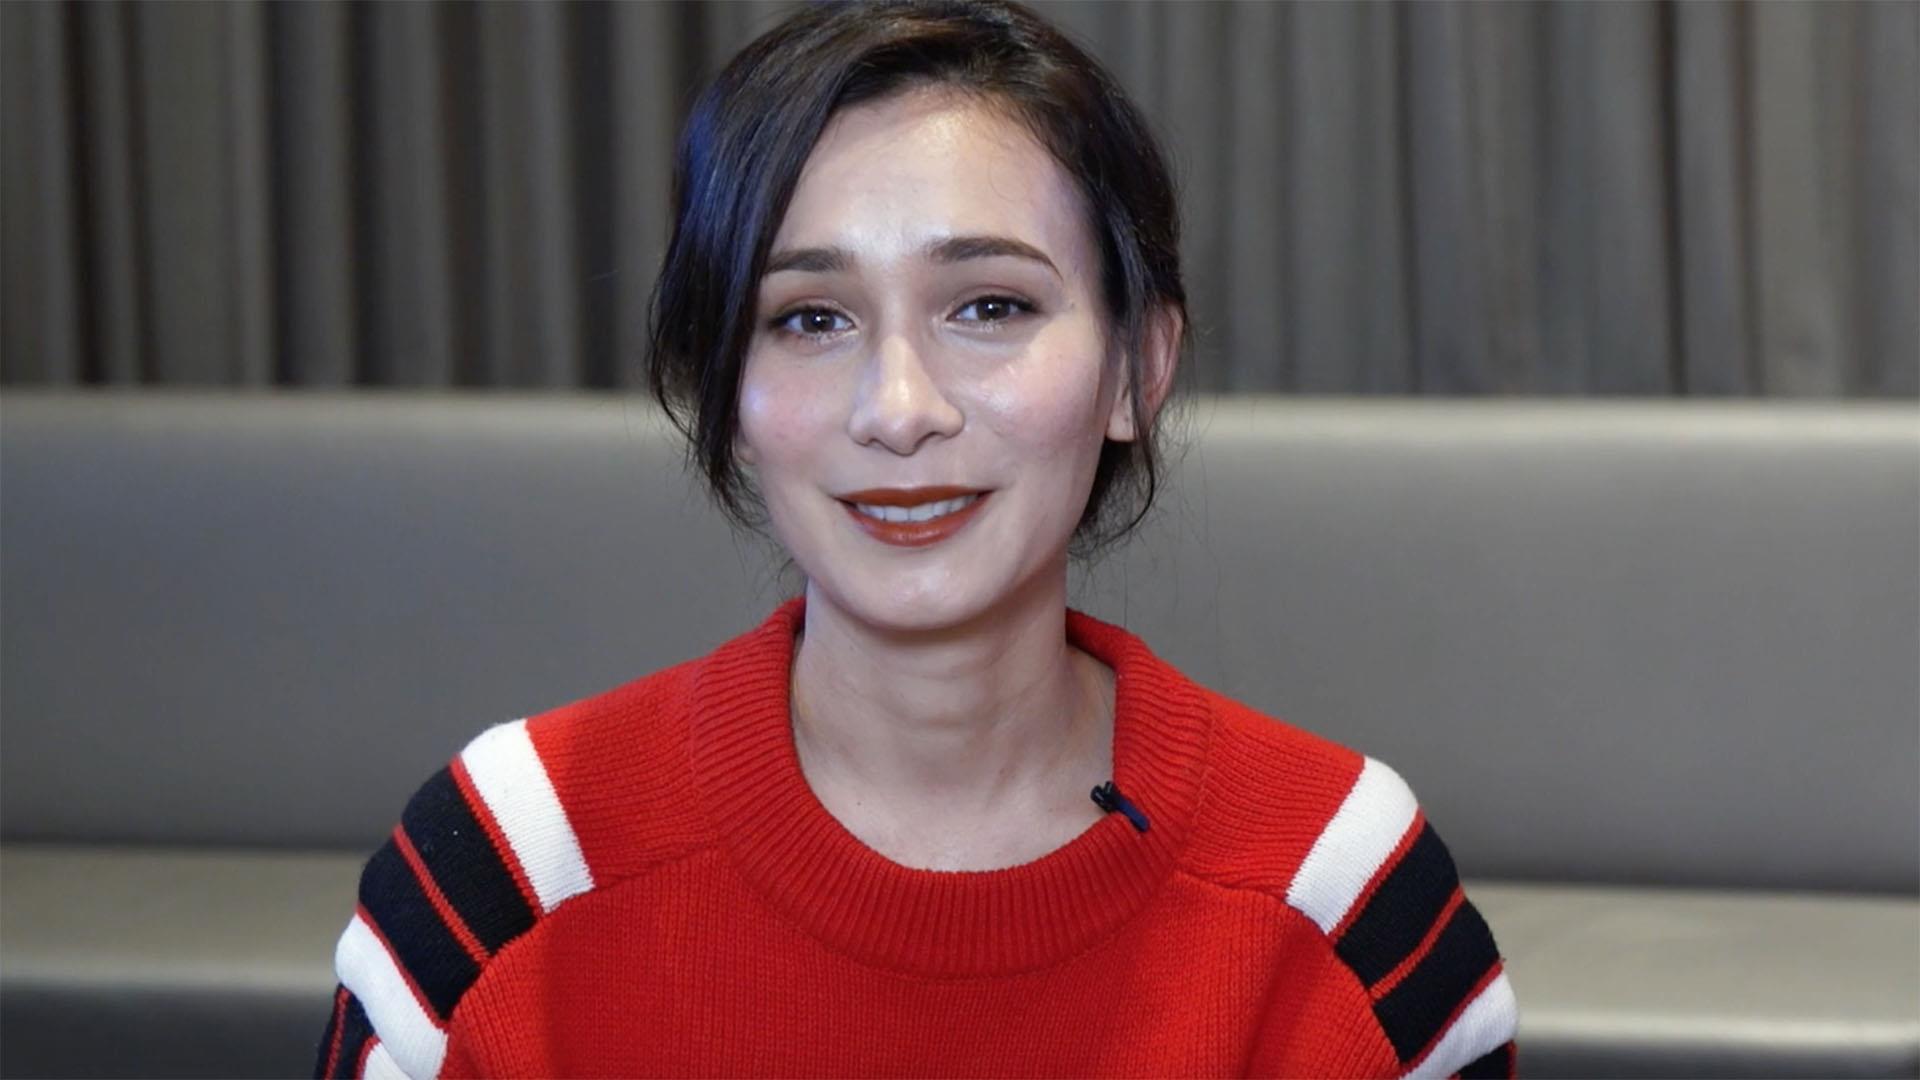 Actress Celina Jade On Accepting Her Third Degree Burn Scars